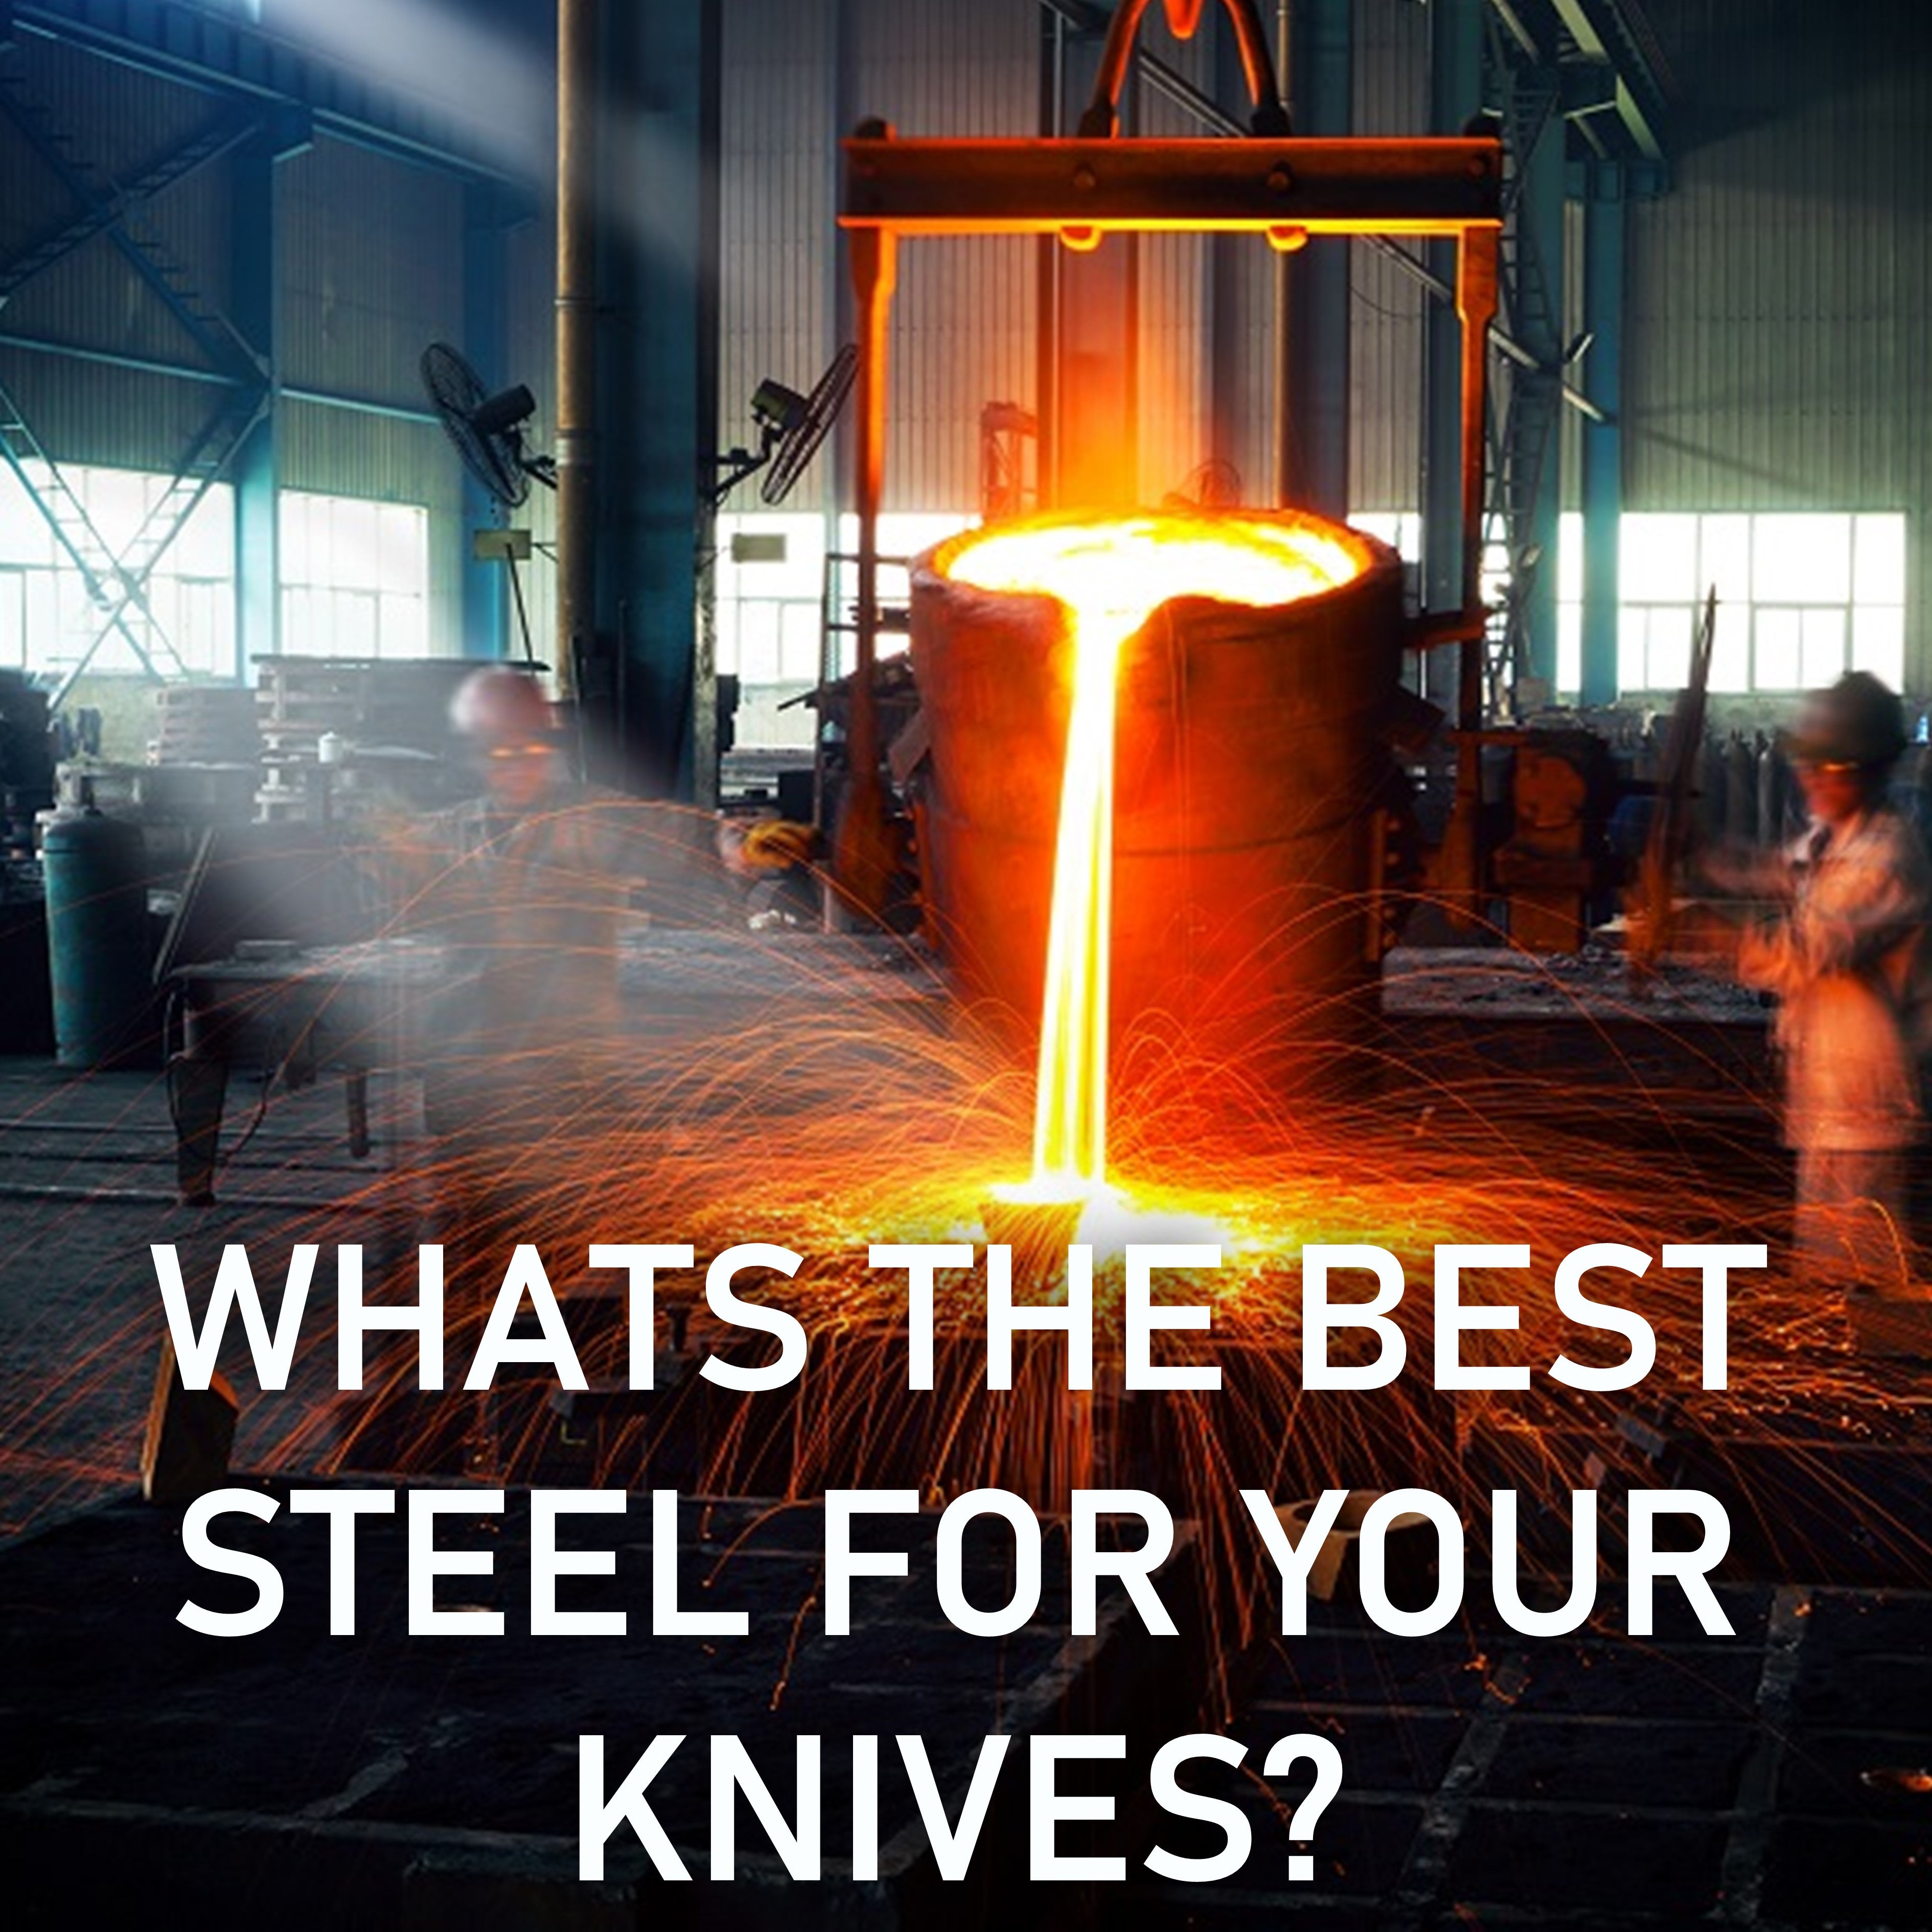 molten steel being poured over the text "Whats the best steel for your knives?"